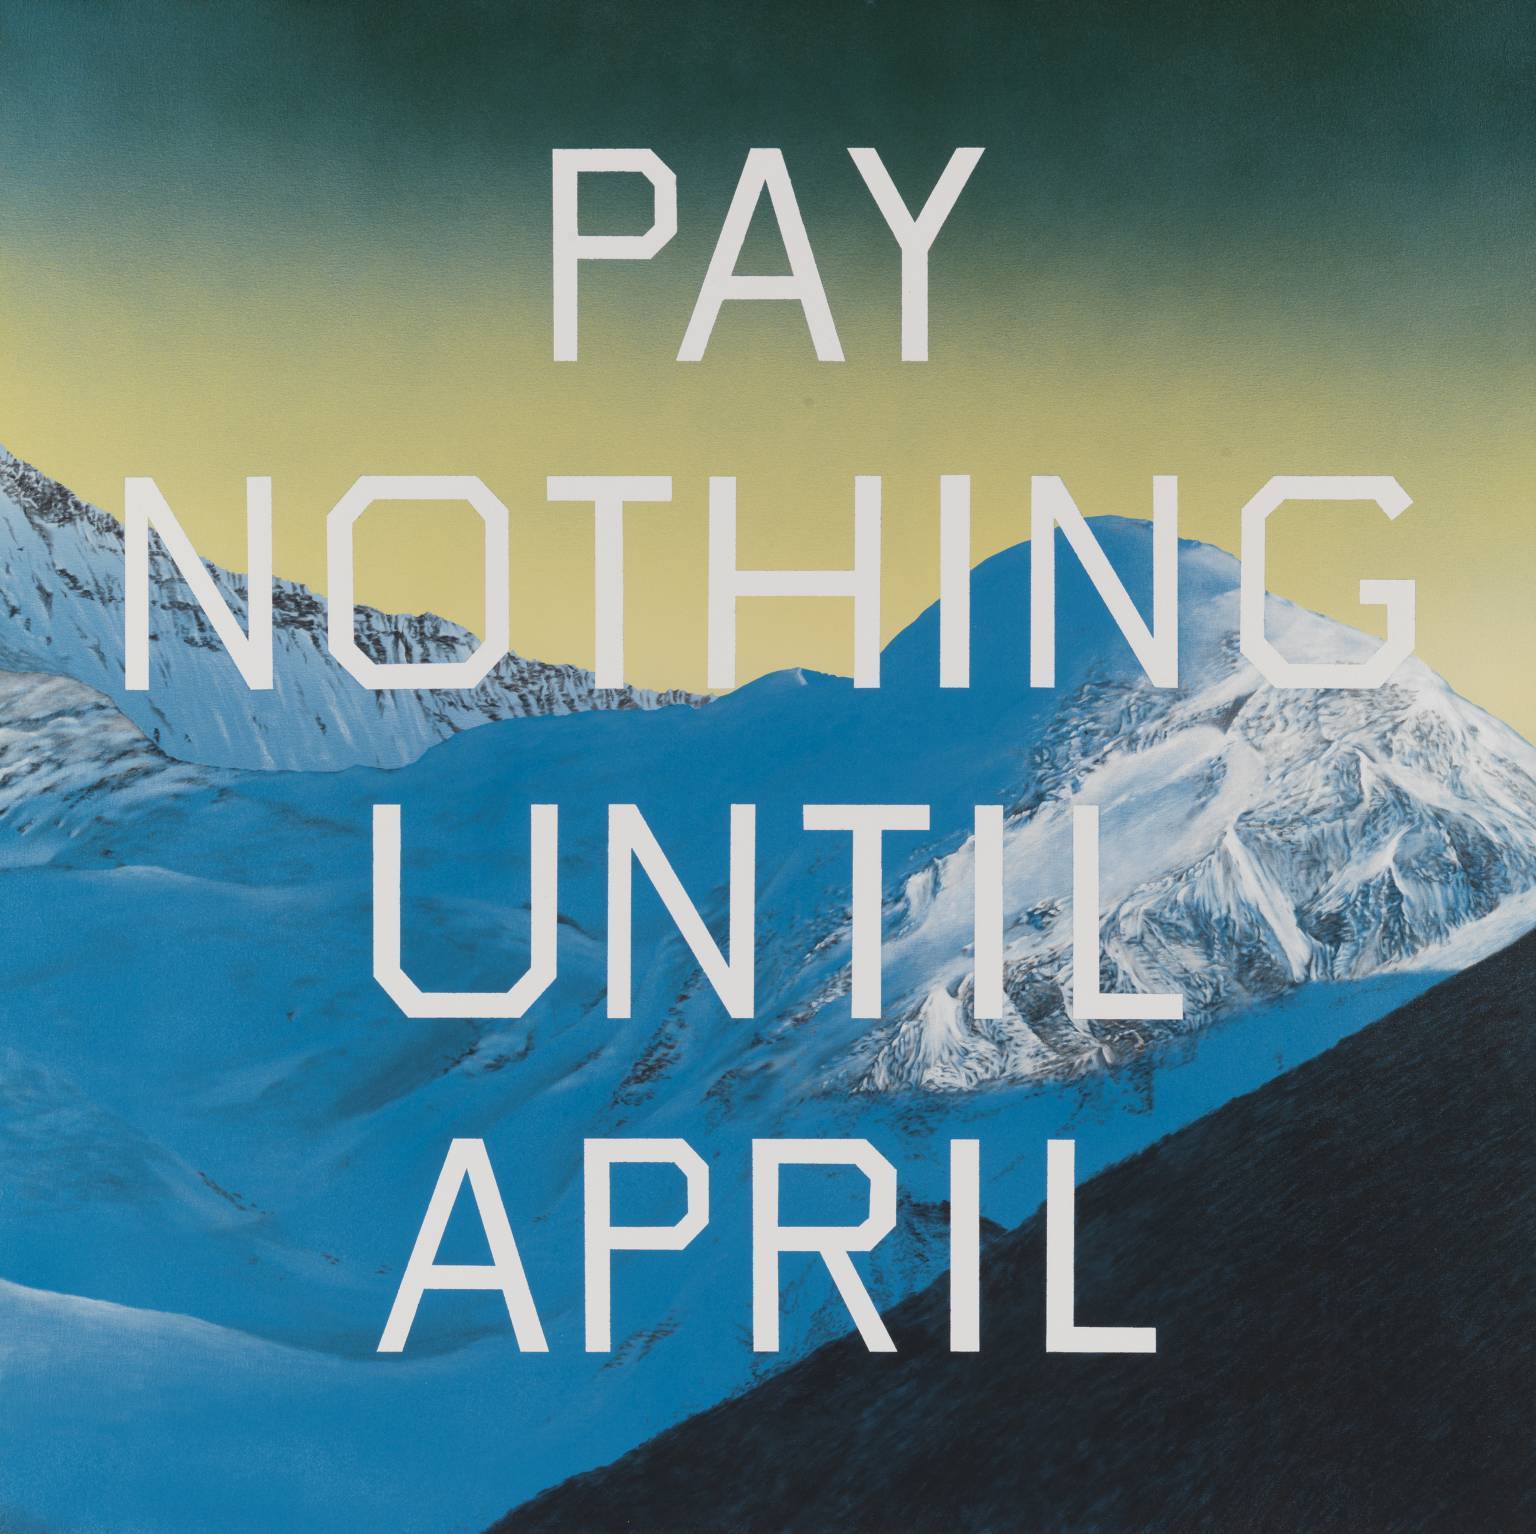 Ed Ruscha. Pay Nothing Until April. 2007. Acrylic paint on canvas. 1.5 x 1.5 m. Tate, London.